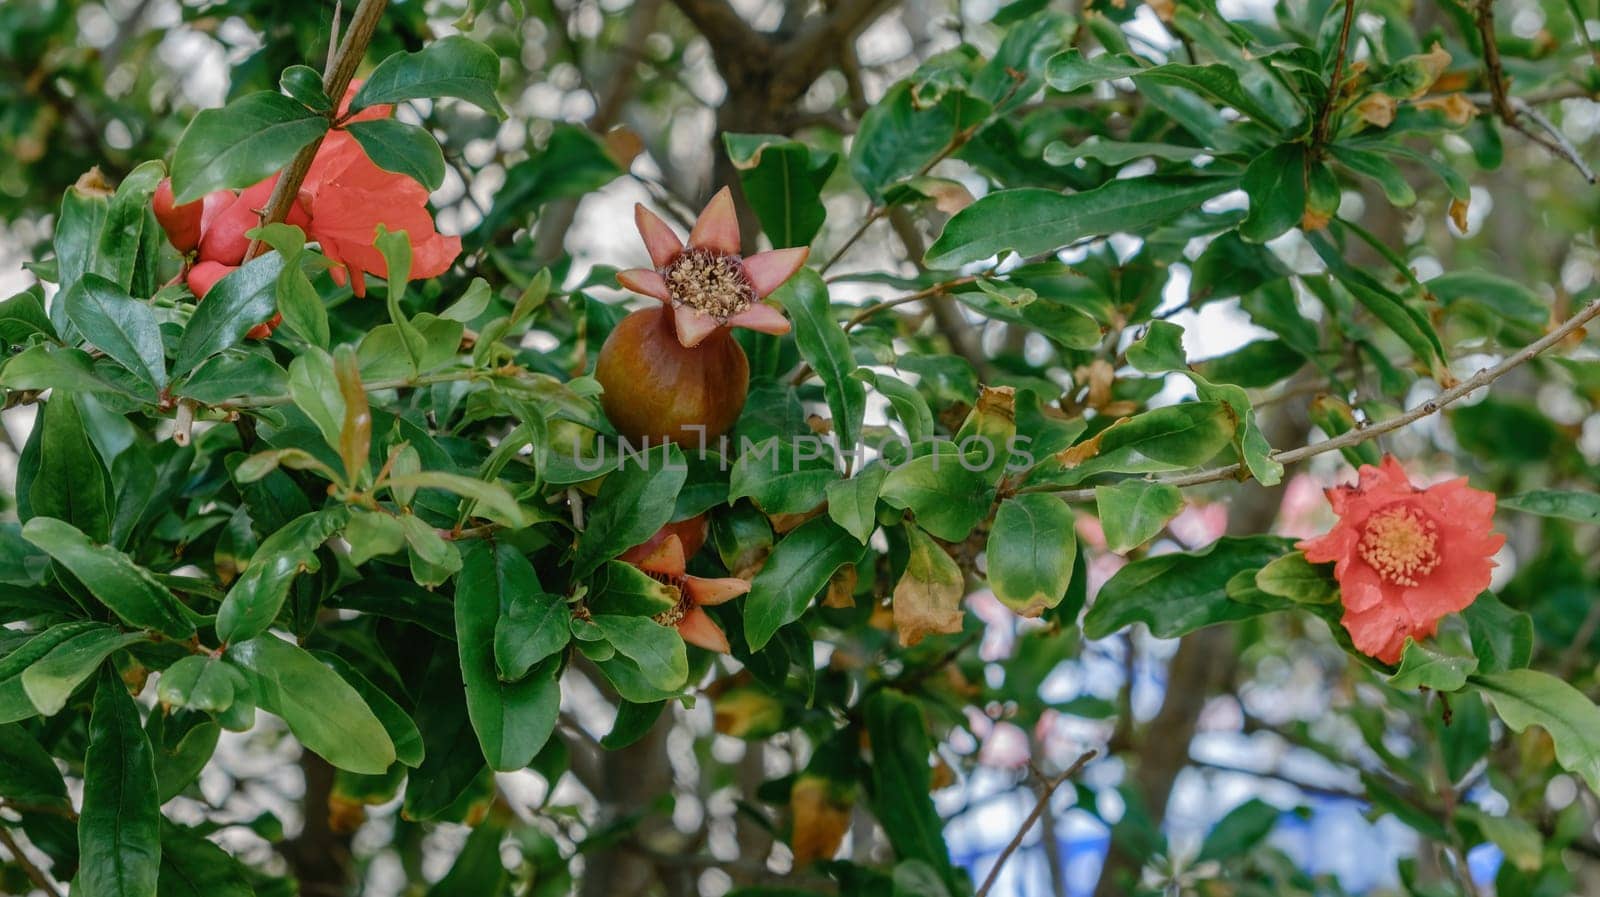 Red pomegranate flowers on pomegranate tree in the garden by Renisons